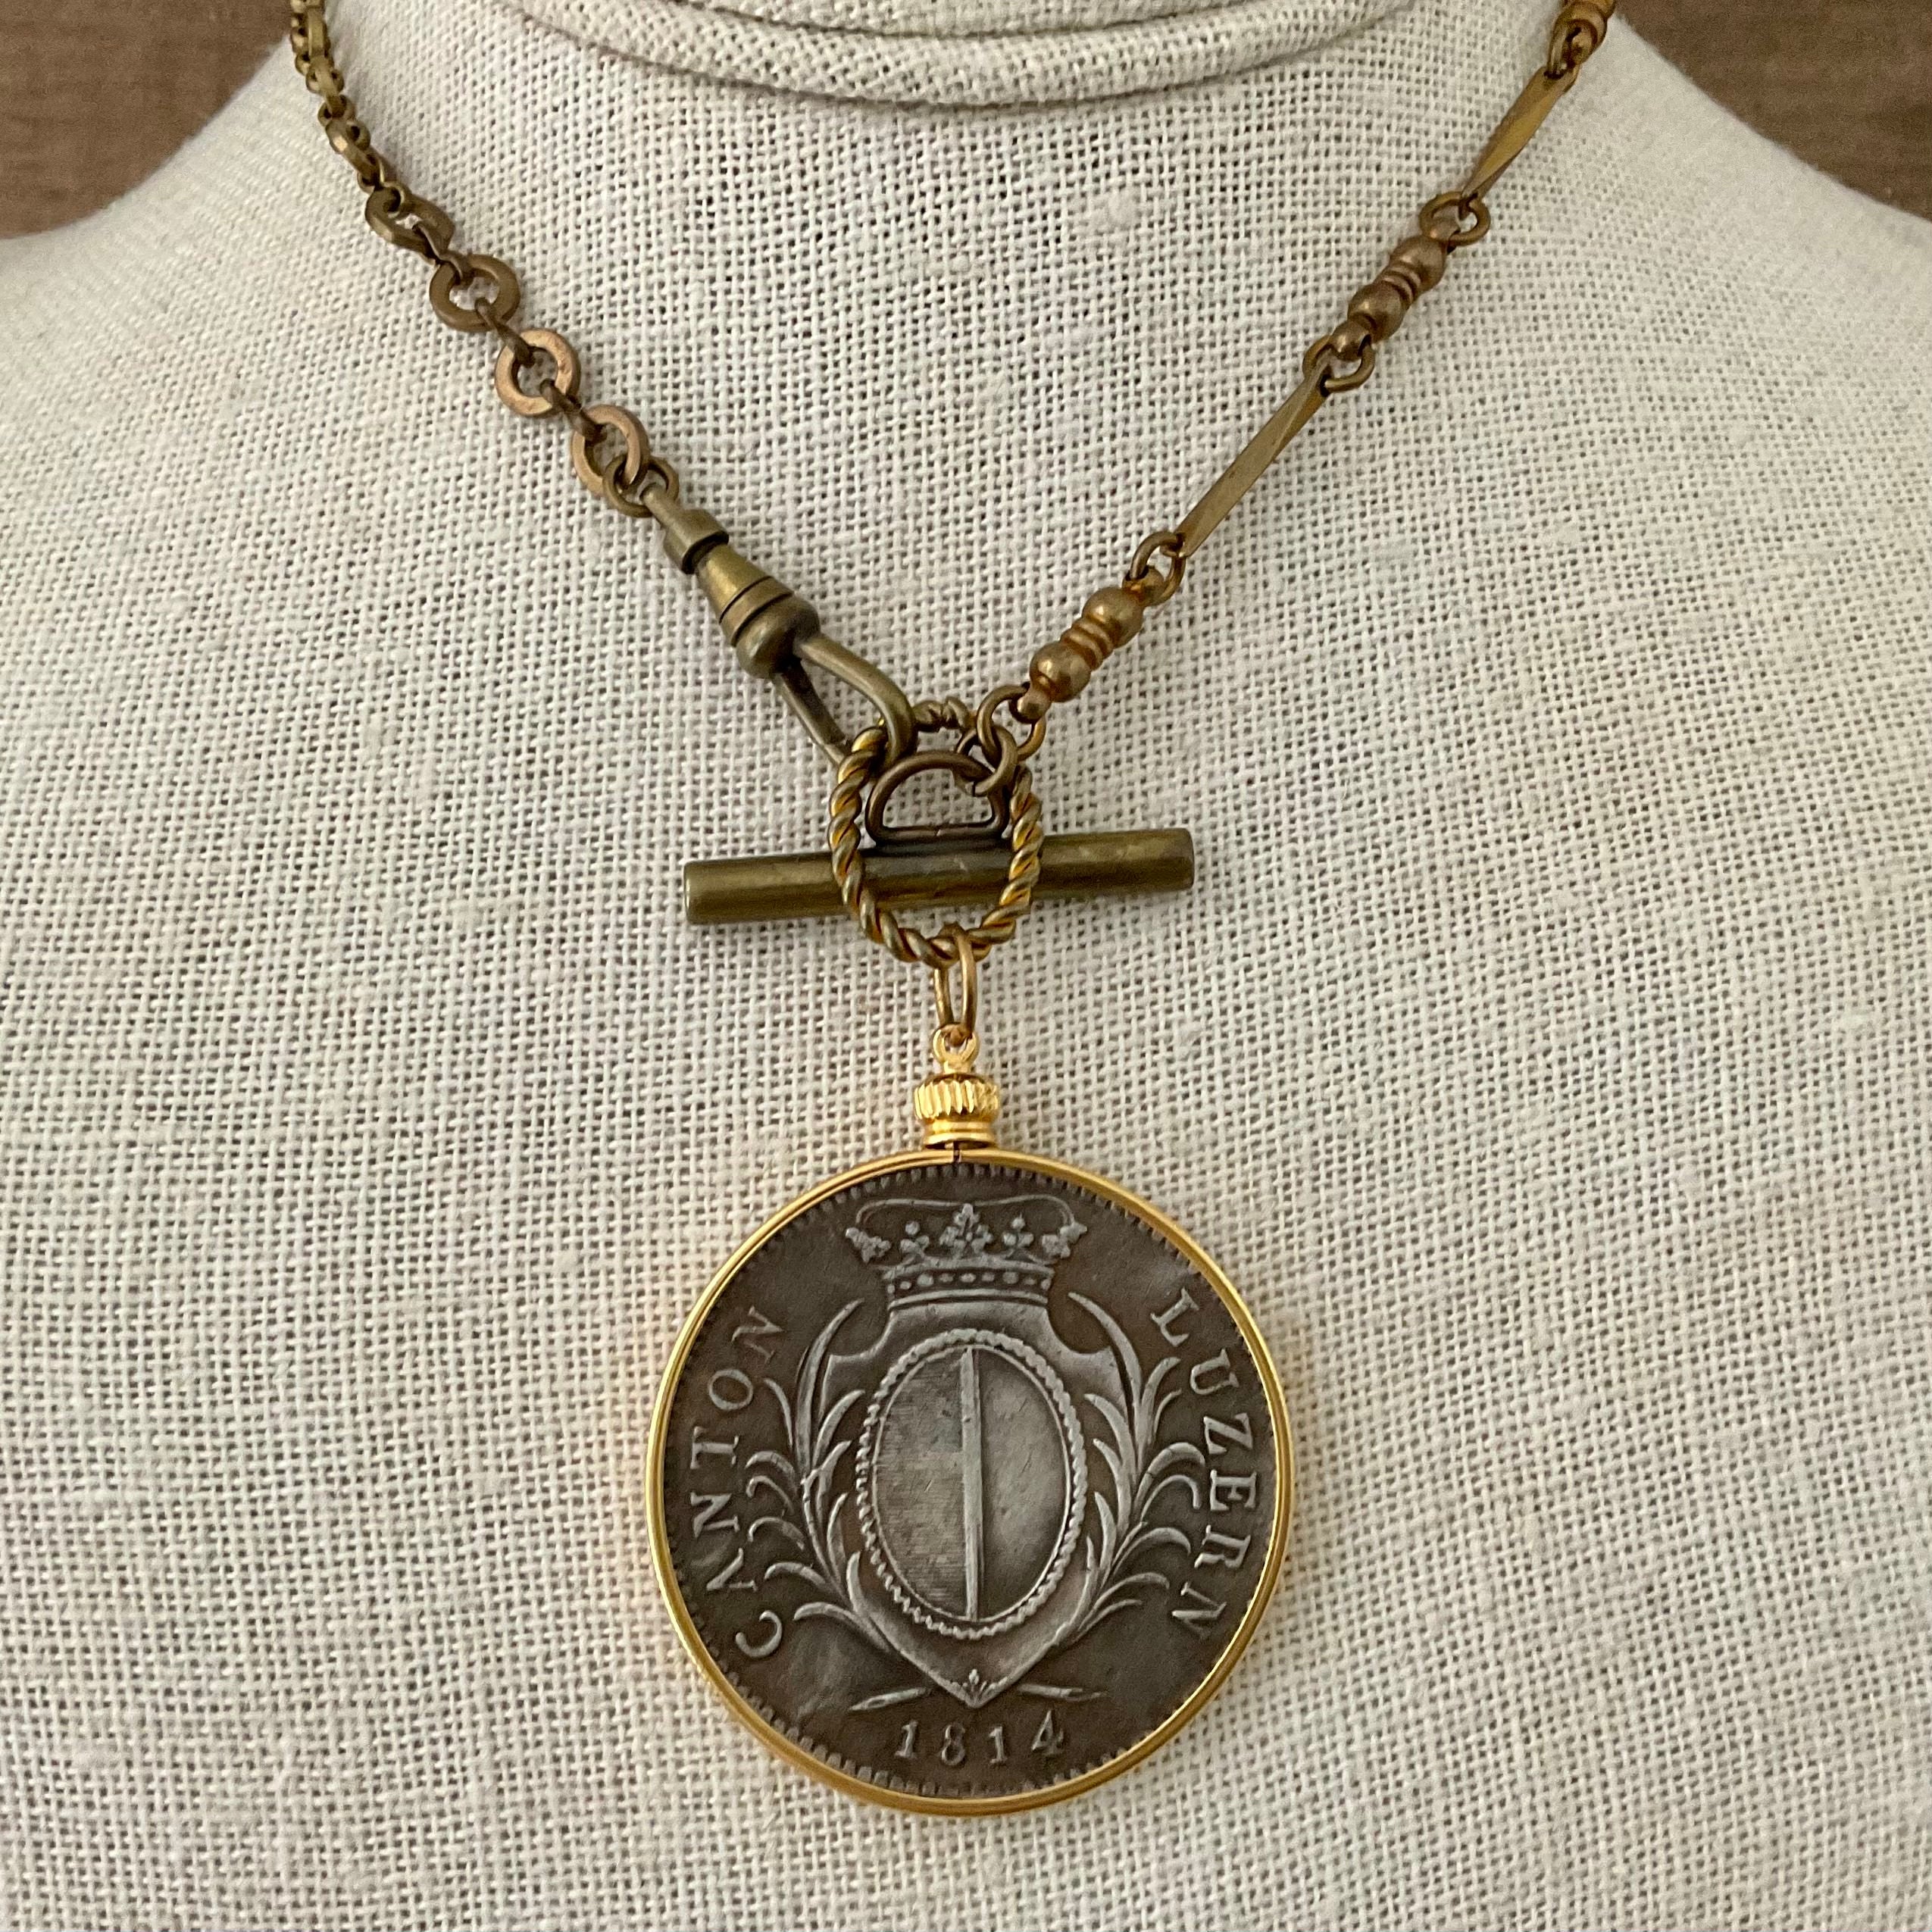 Vintage Brass Chain with Swiss Coin Circa 1814